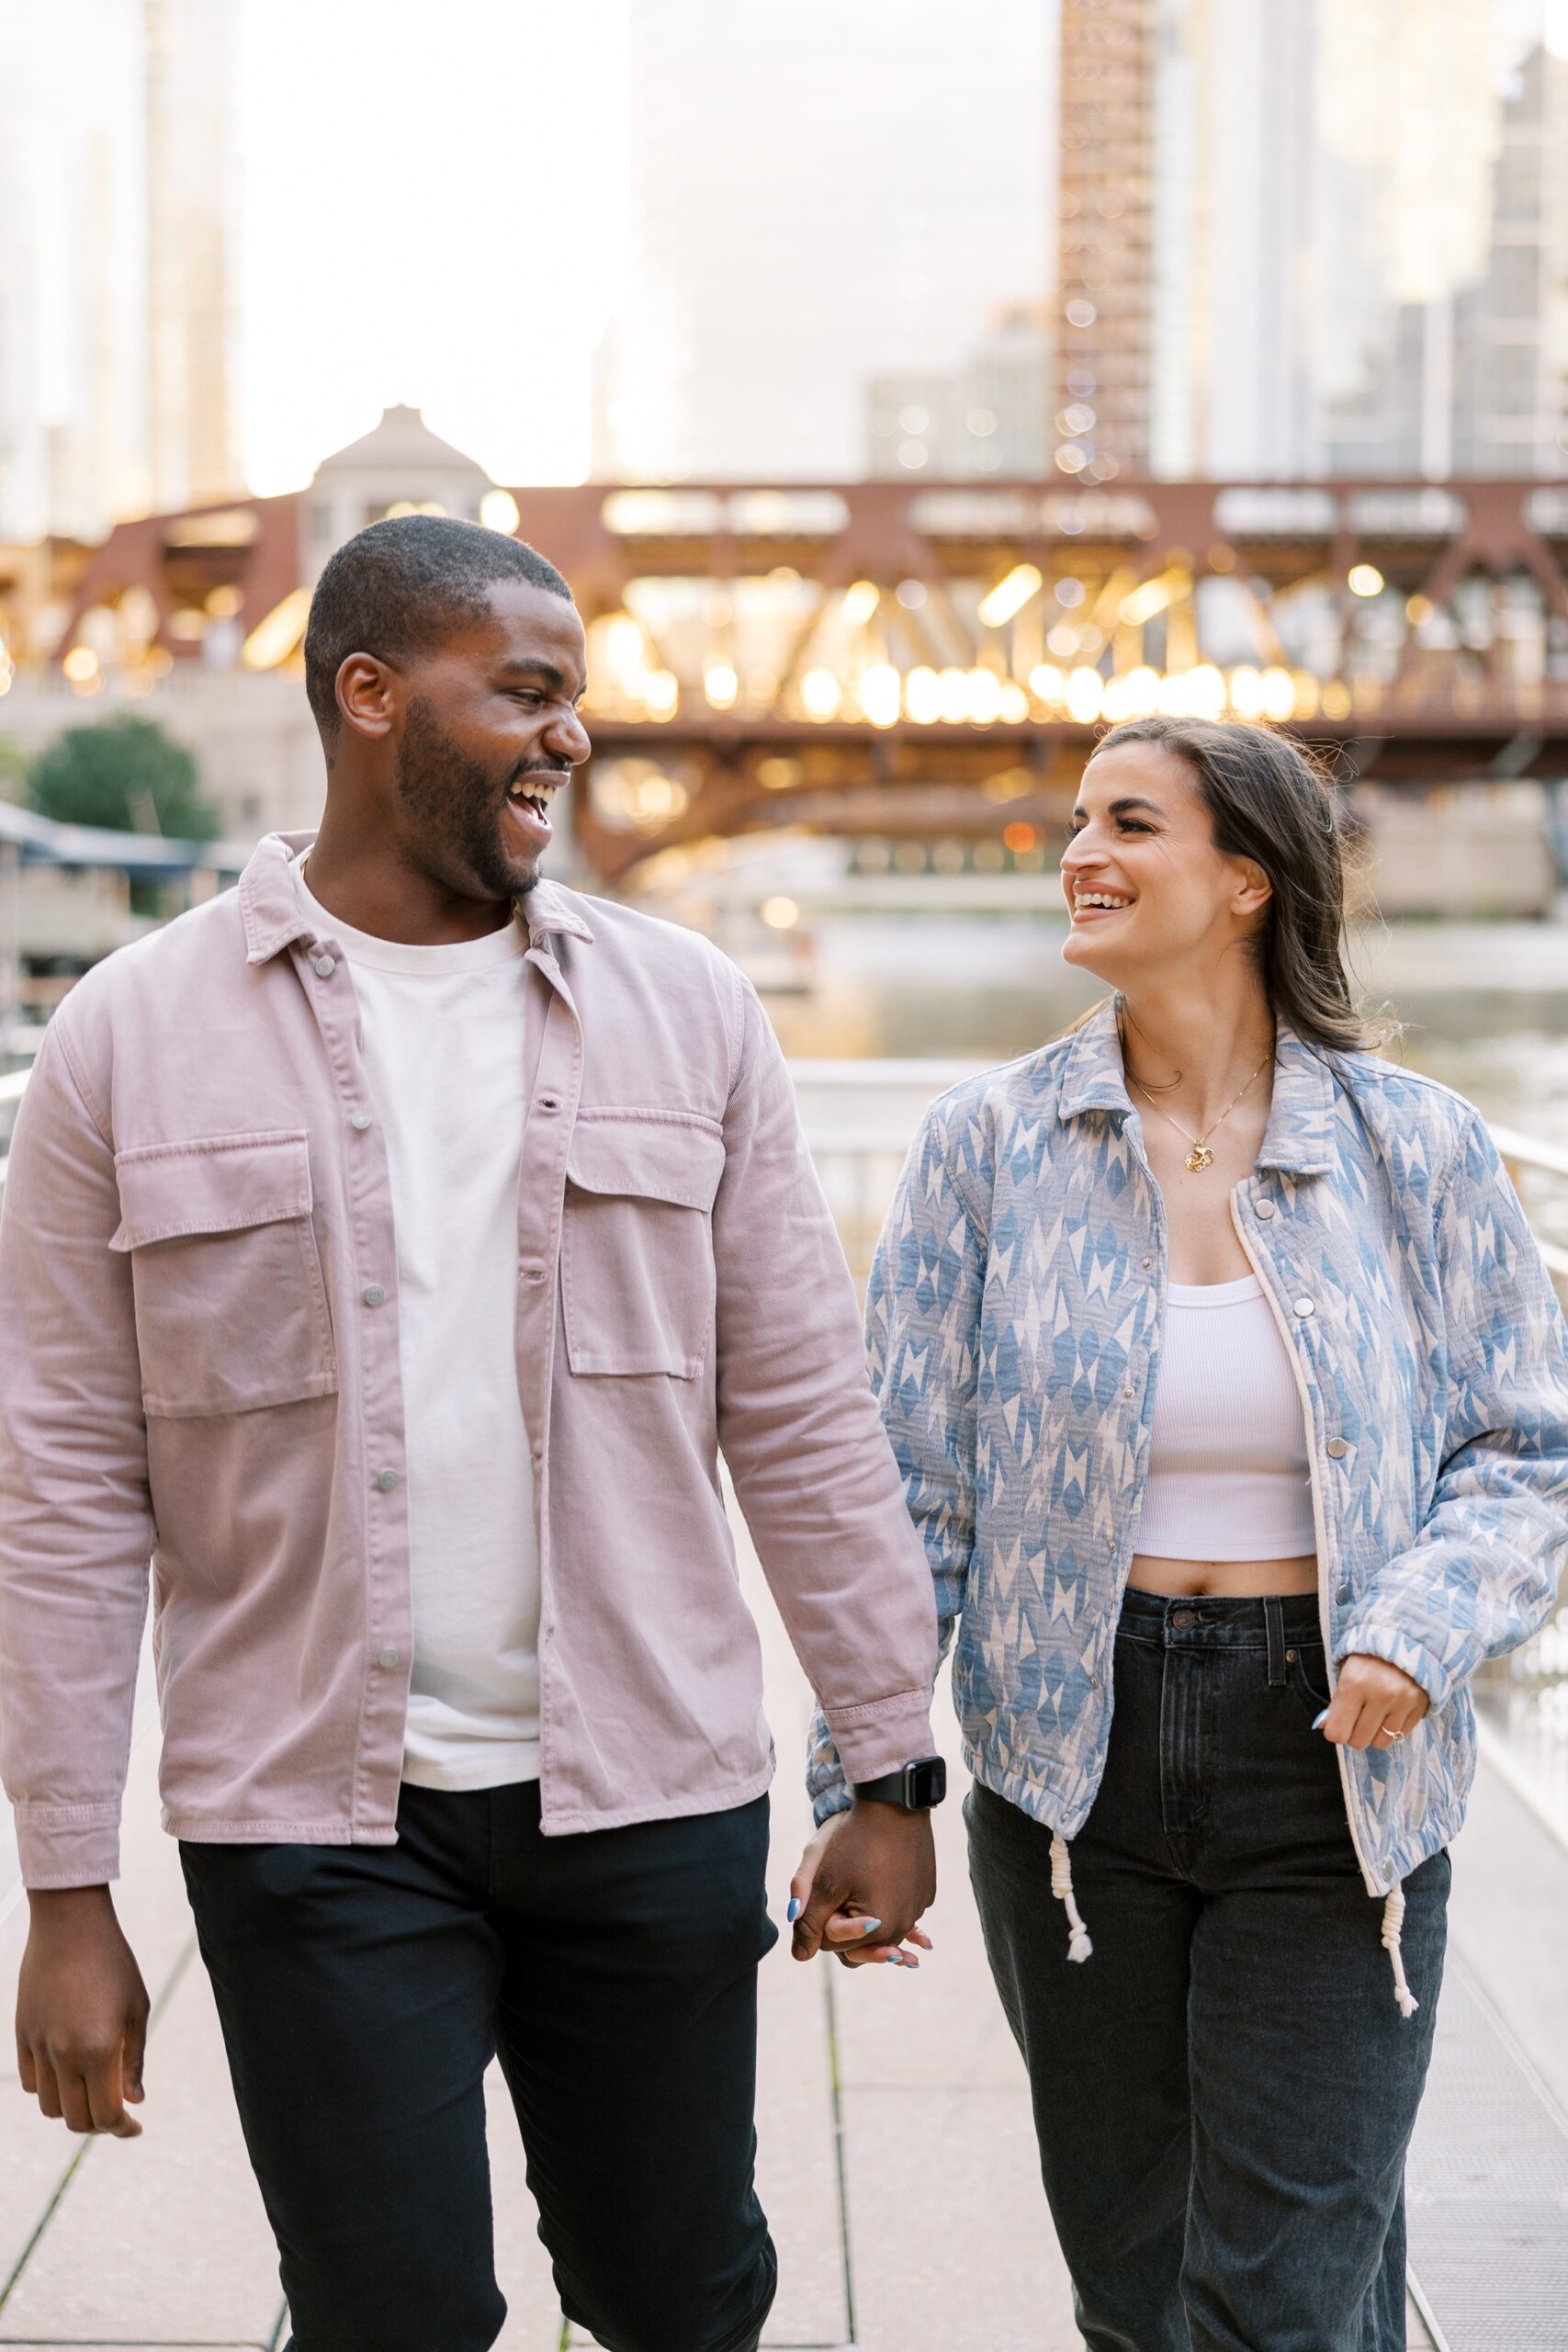 Man and woman smile at each other during sunset Downtown Chicago engagement photo session